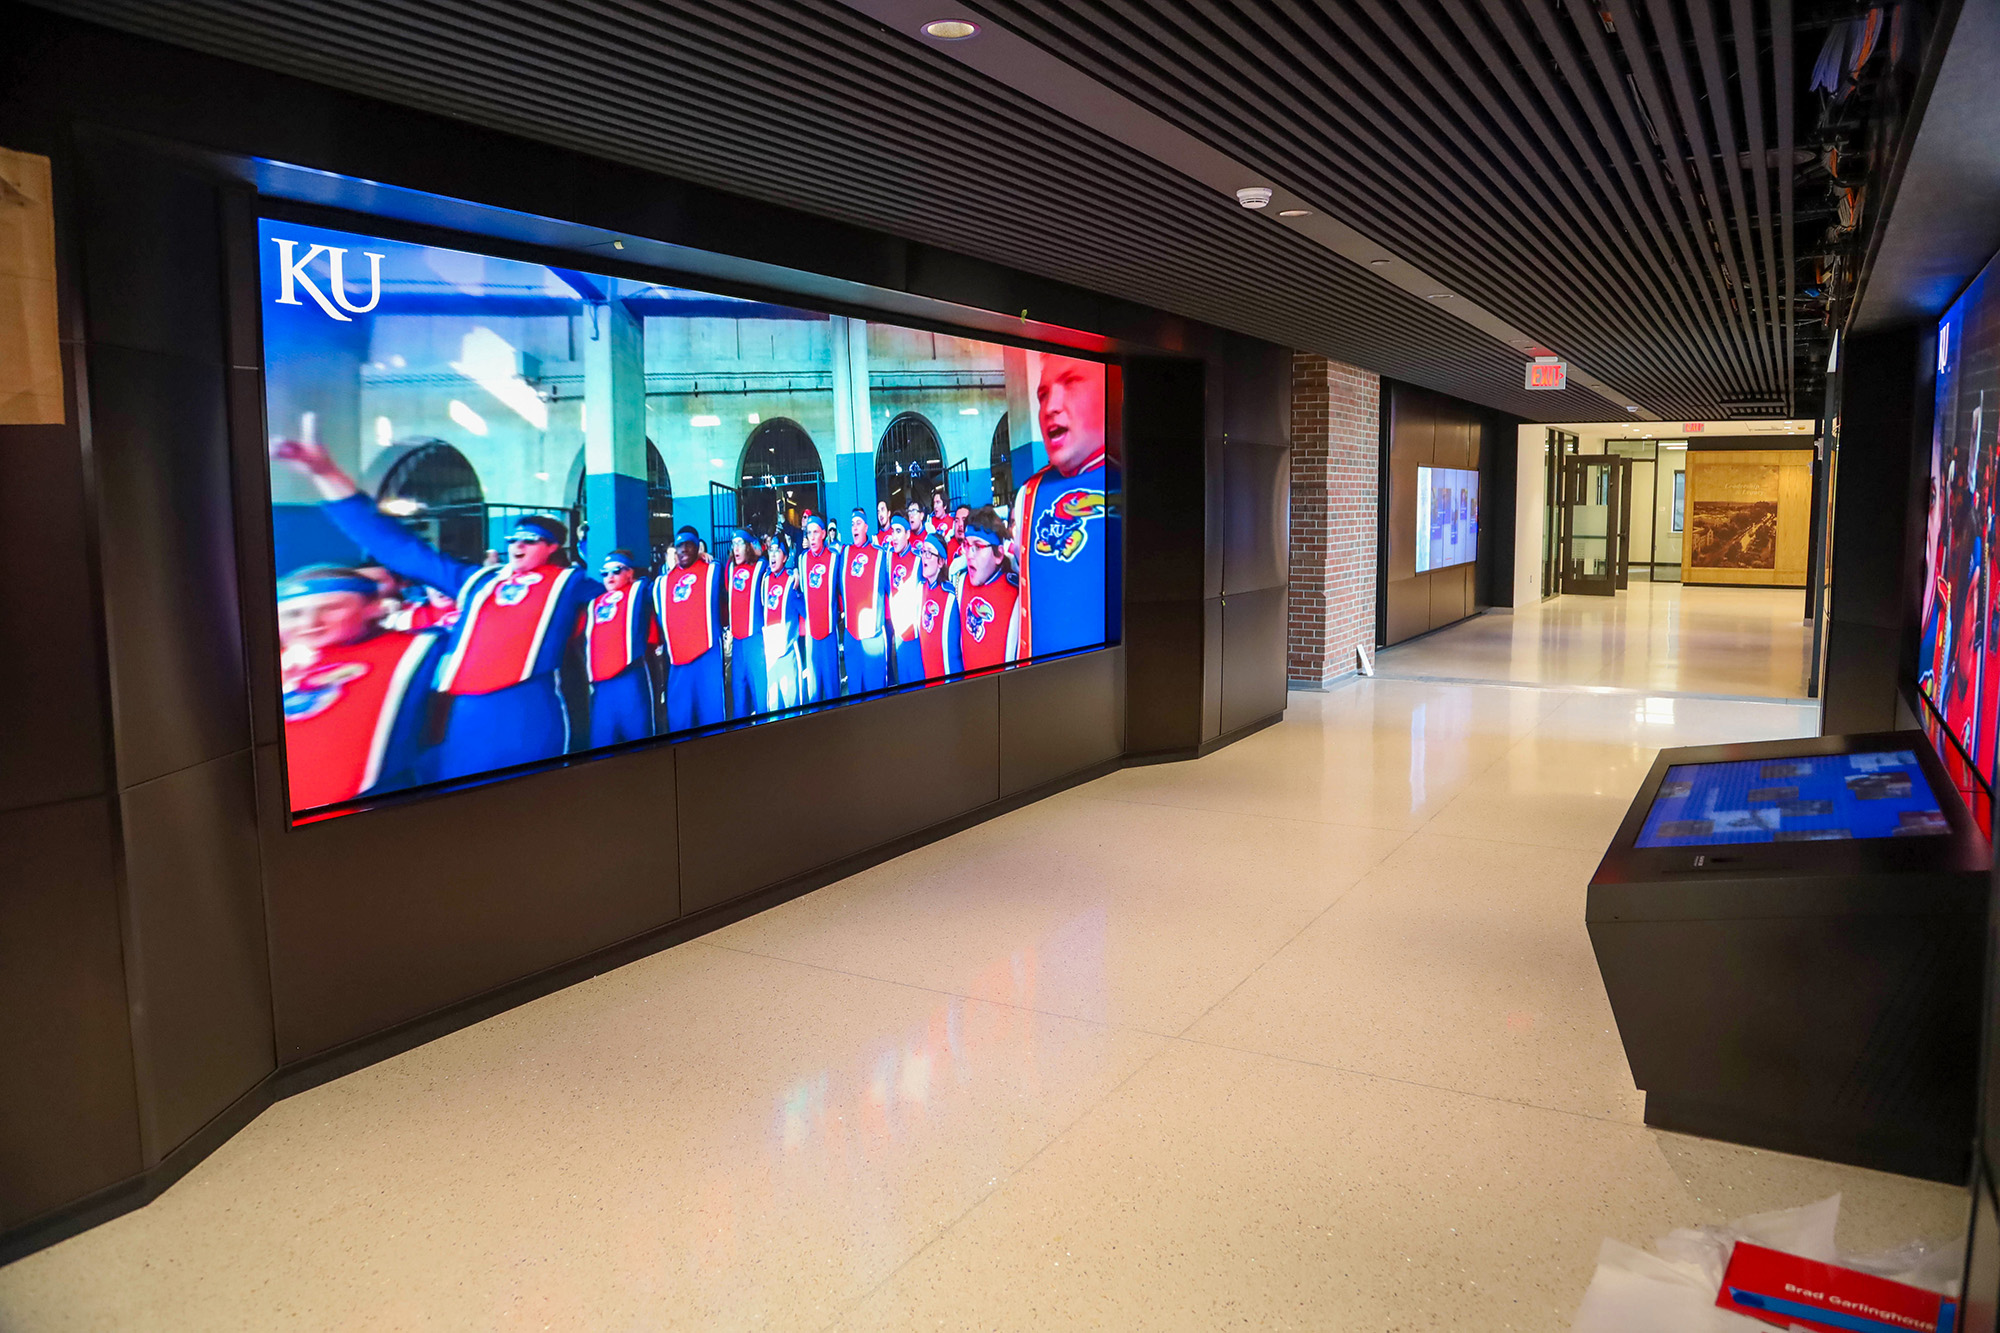 Jayhawk Welcome Center interior with widescreen project showing Marching Jayhawks.